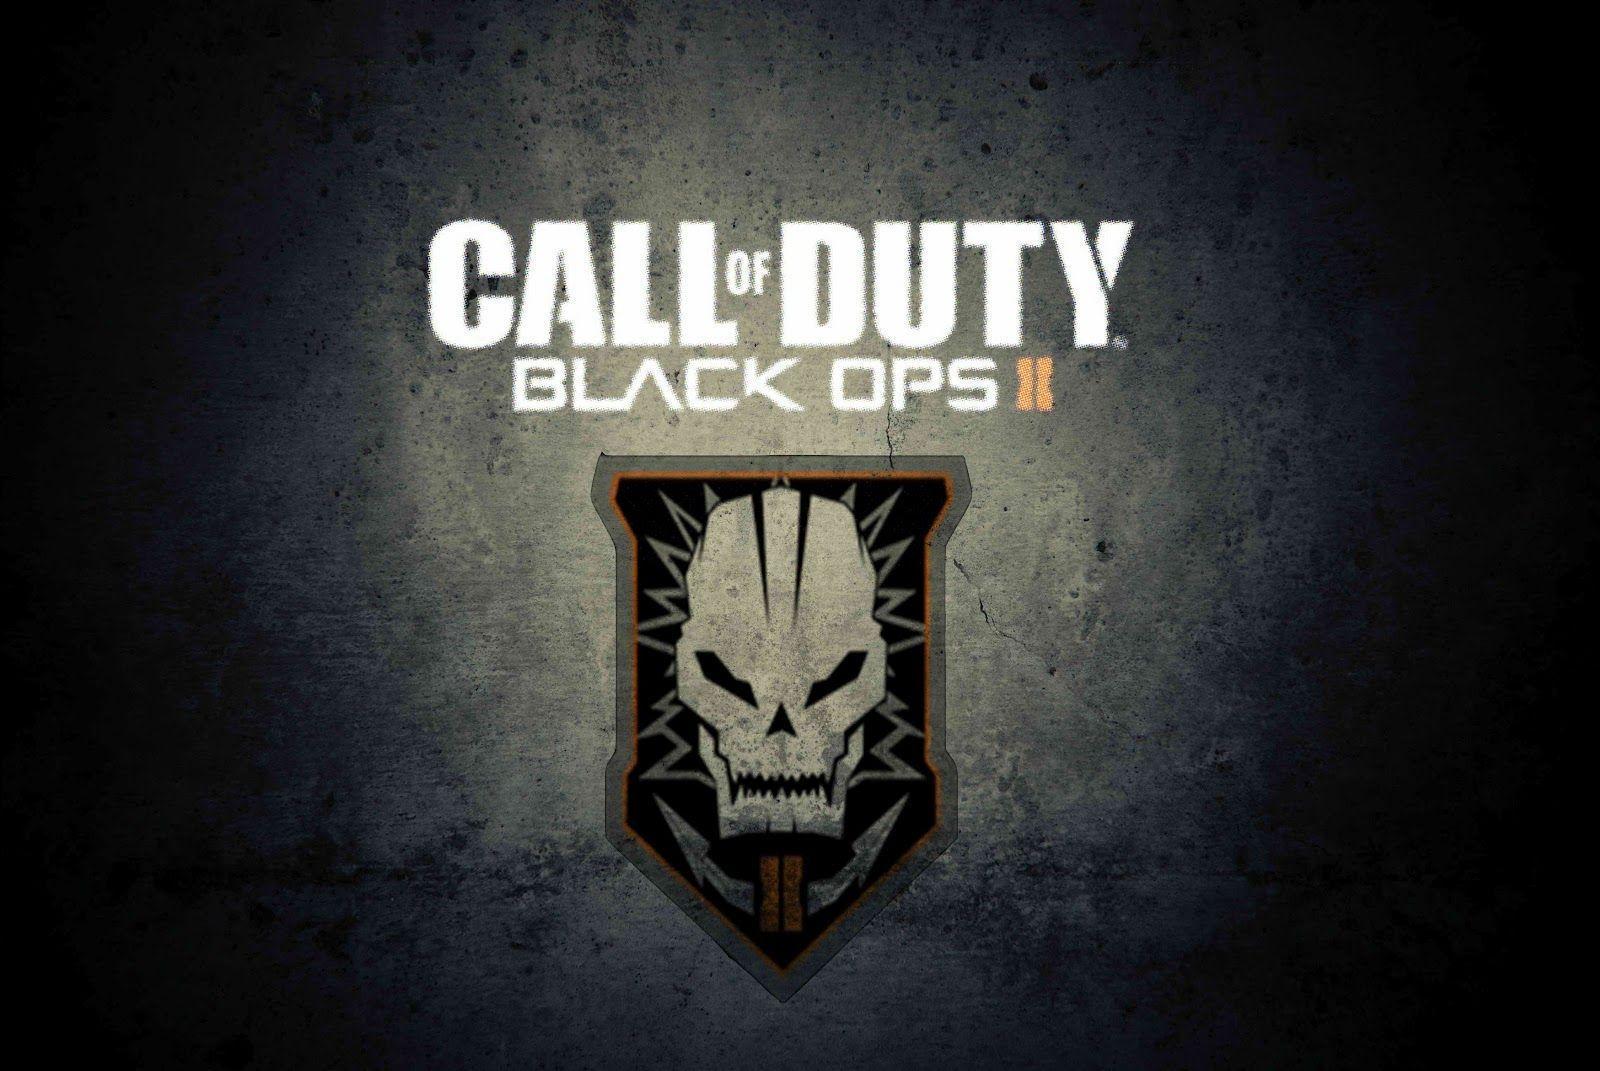 Call Of Duty Black Ops 2 Wallpaper 2598 1600x1071 px